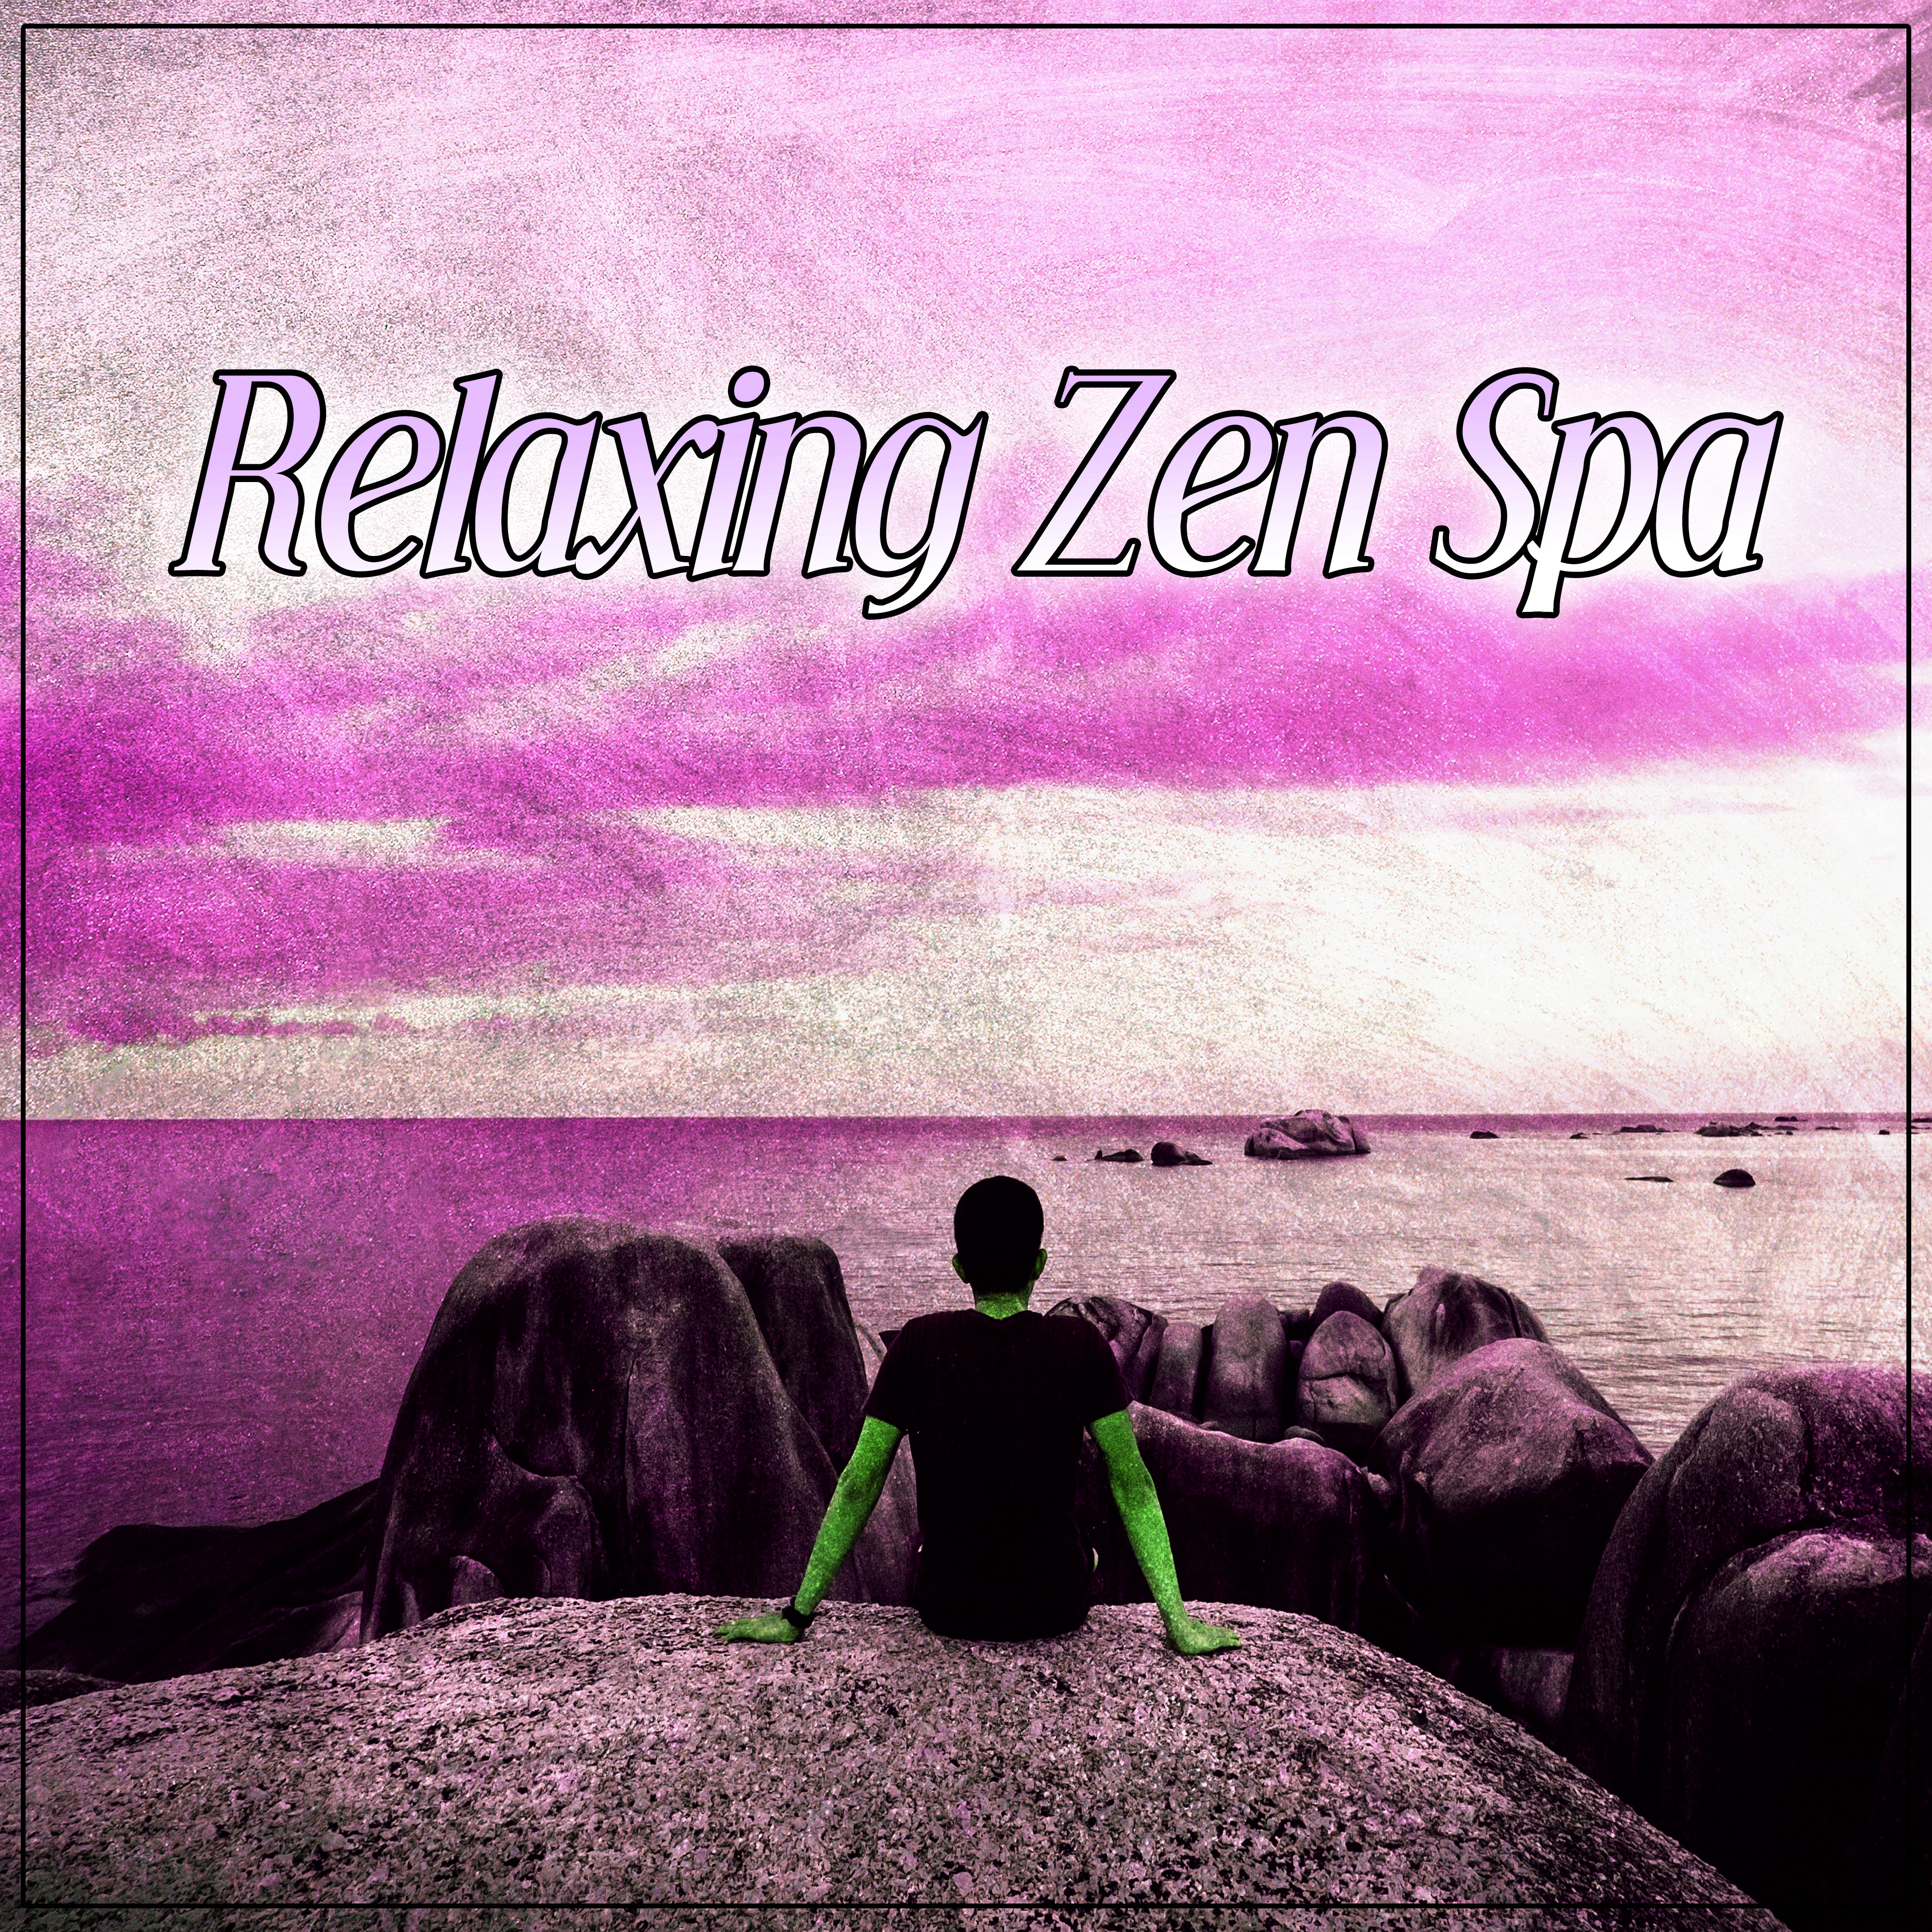 Relaxing Zen Spa - Asian Zen Therapy, Nature Sounds, Mindfulness, Yoga Vibes, Ambient Music, Healing Relaxation